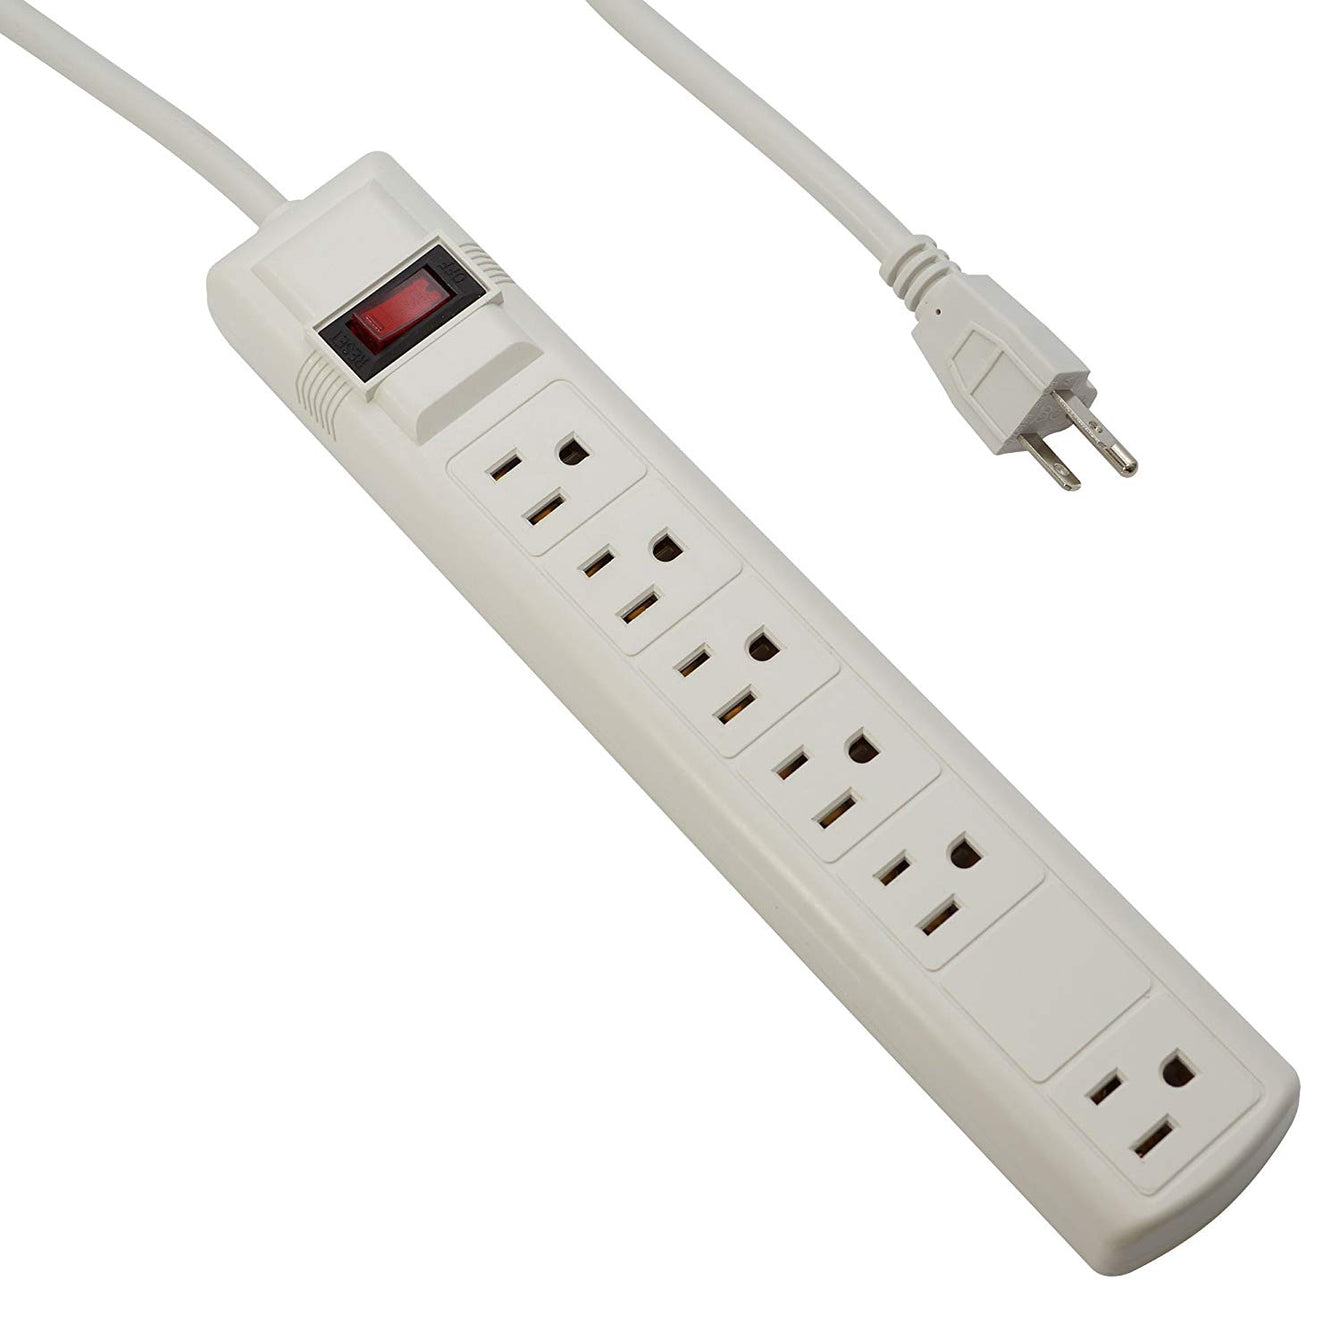 Otimo 6-Outlet Surge Protector Power Strip with 6 Foot Power Cord and LED On Power Strip Indicator, White